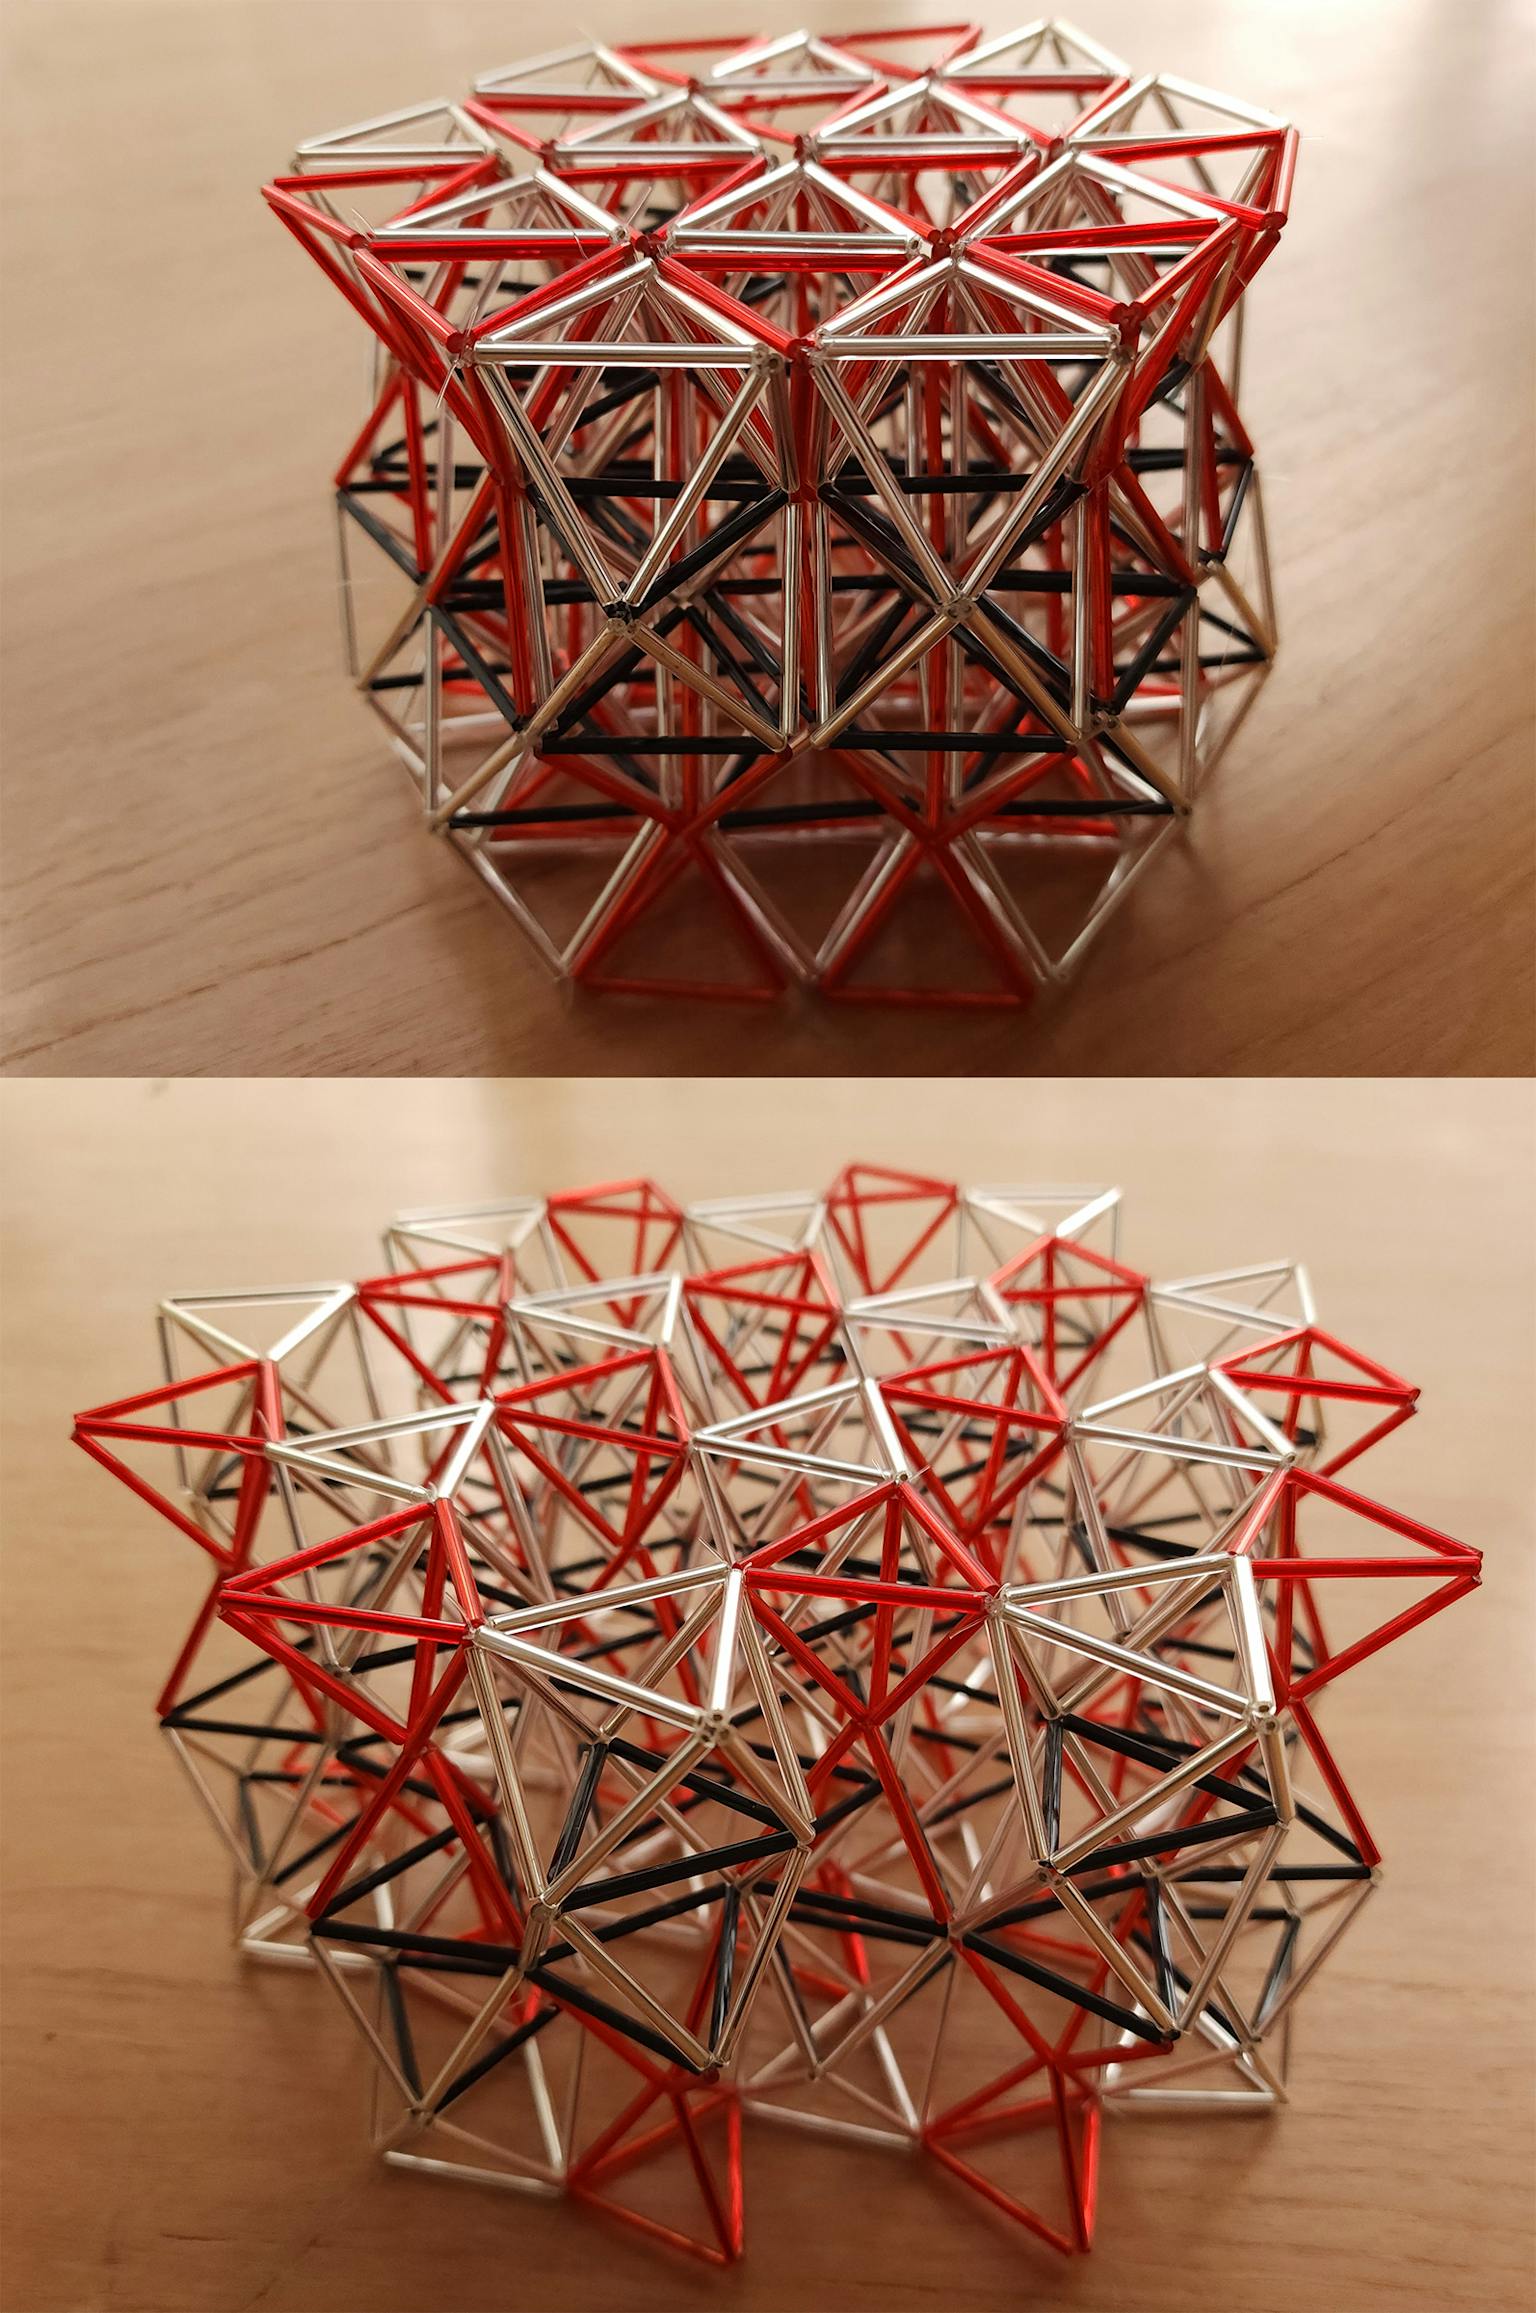 Image for entry 'Extendable auxetic structure based on deltahedron made by stringing bugle beads'